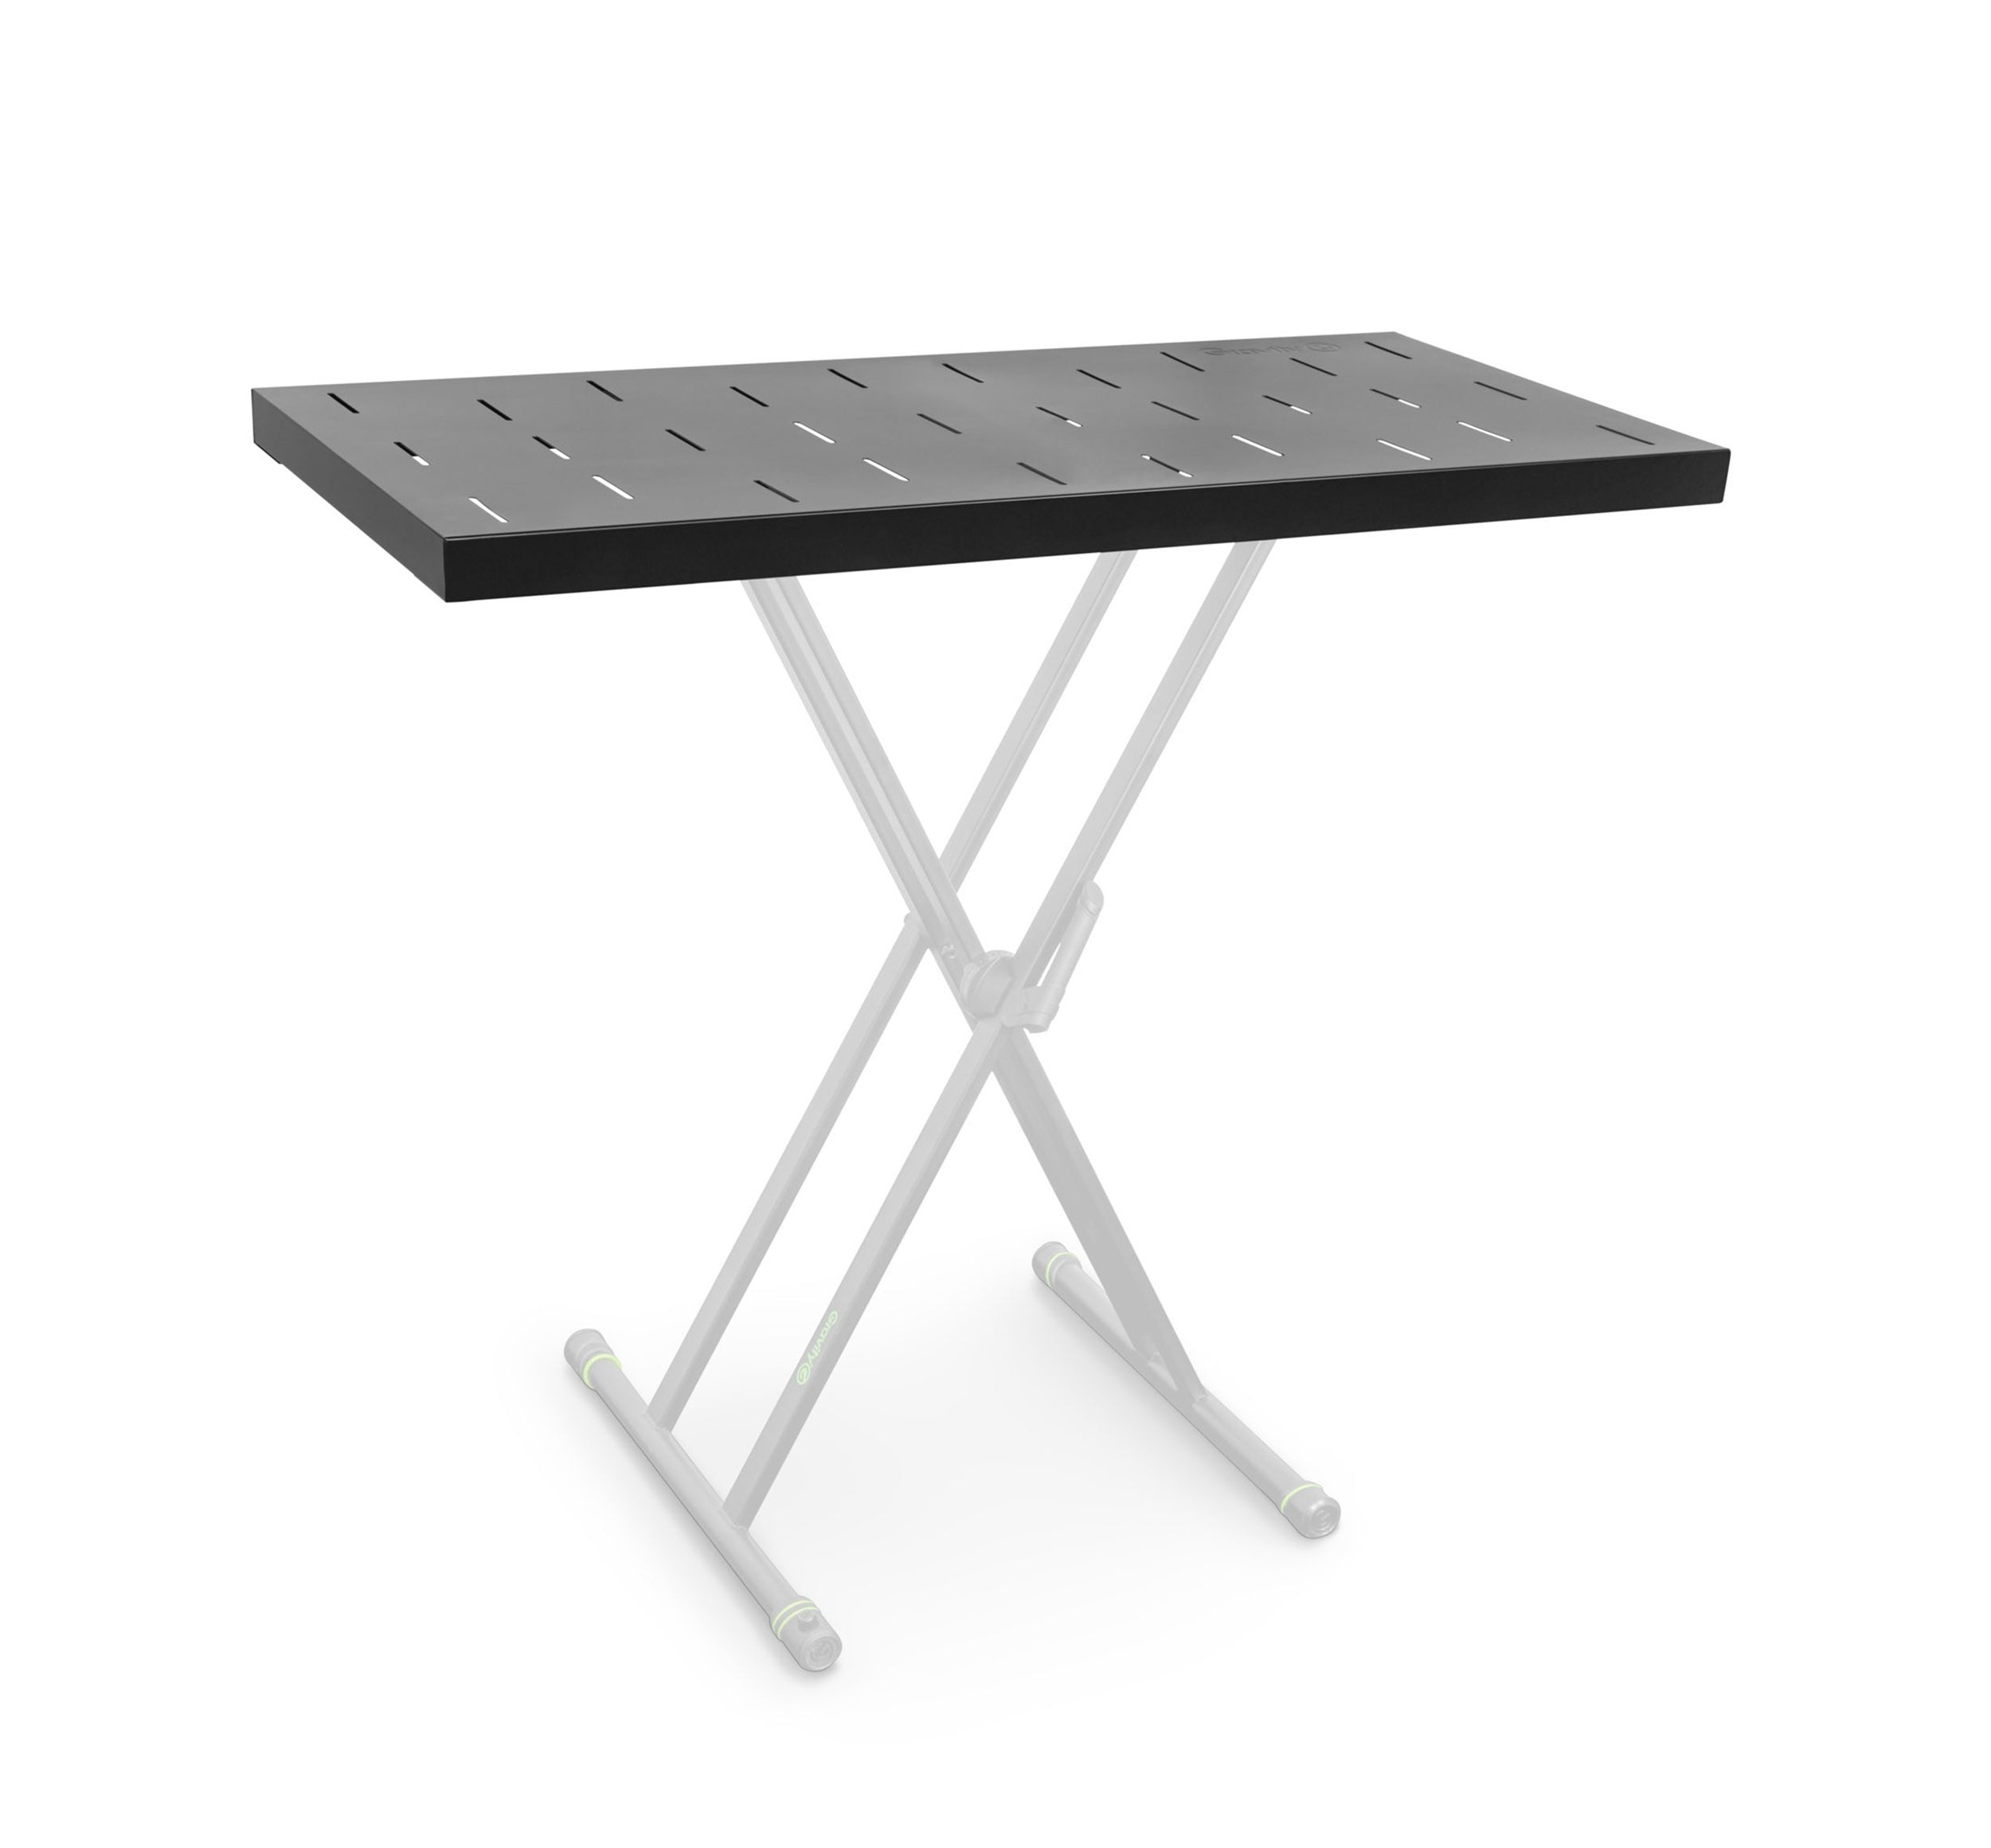 Gravity KS RD 1 Rapid Desk for X-Type Keyboard Stands by Gravity